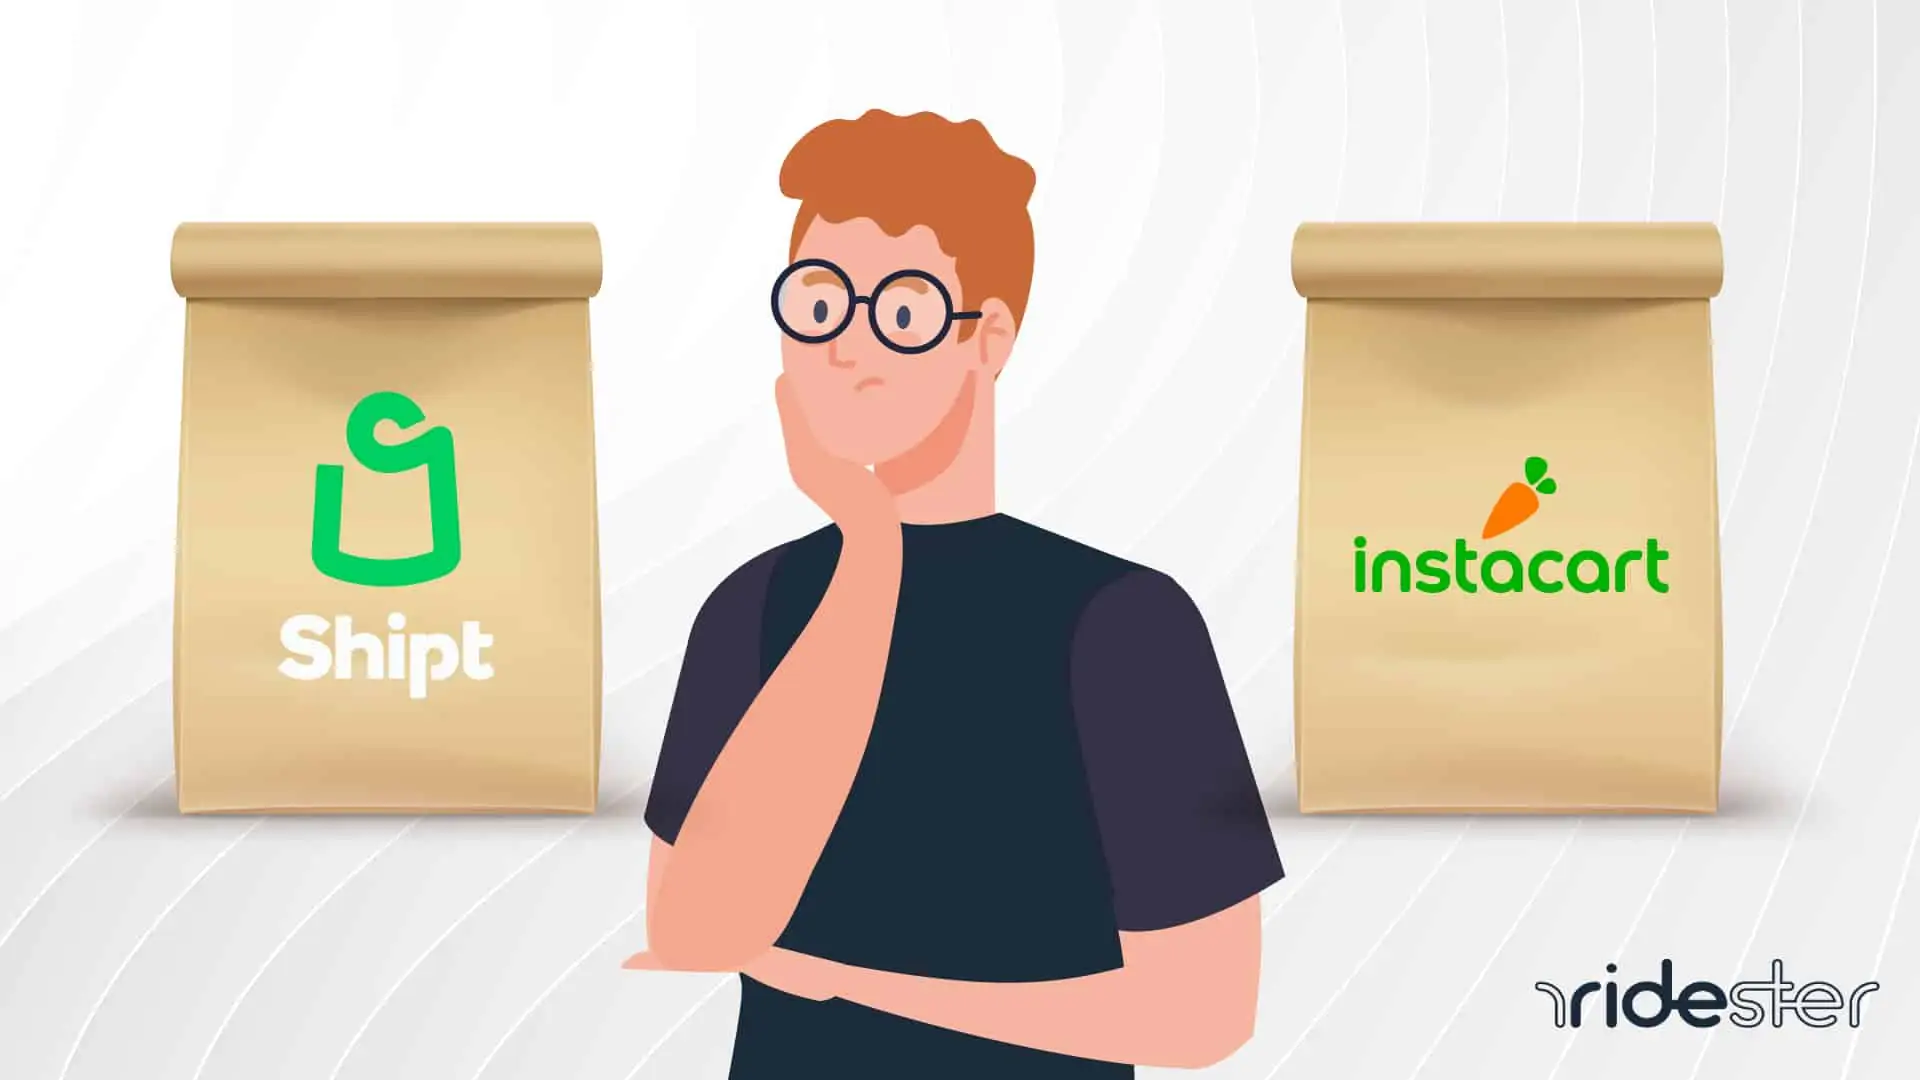 vector graphic showing a person confused about shipt vs instacart and which app to use